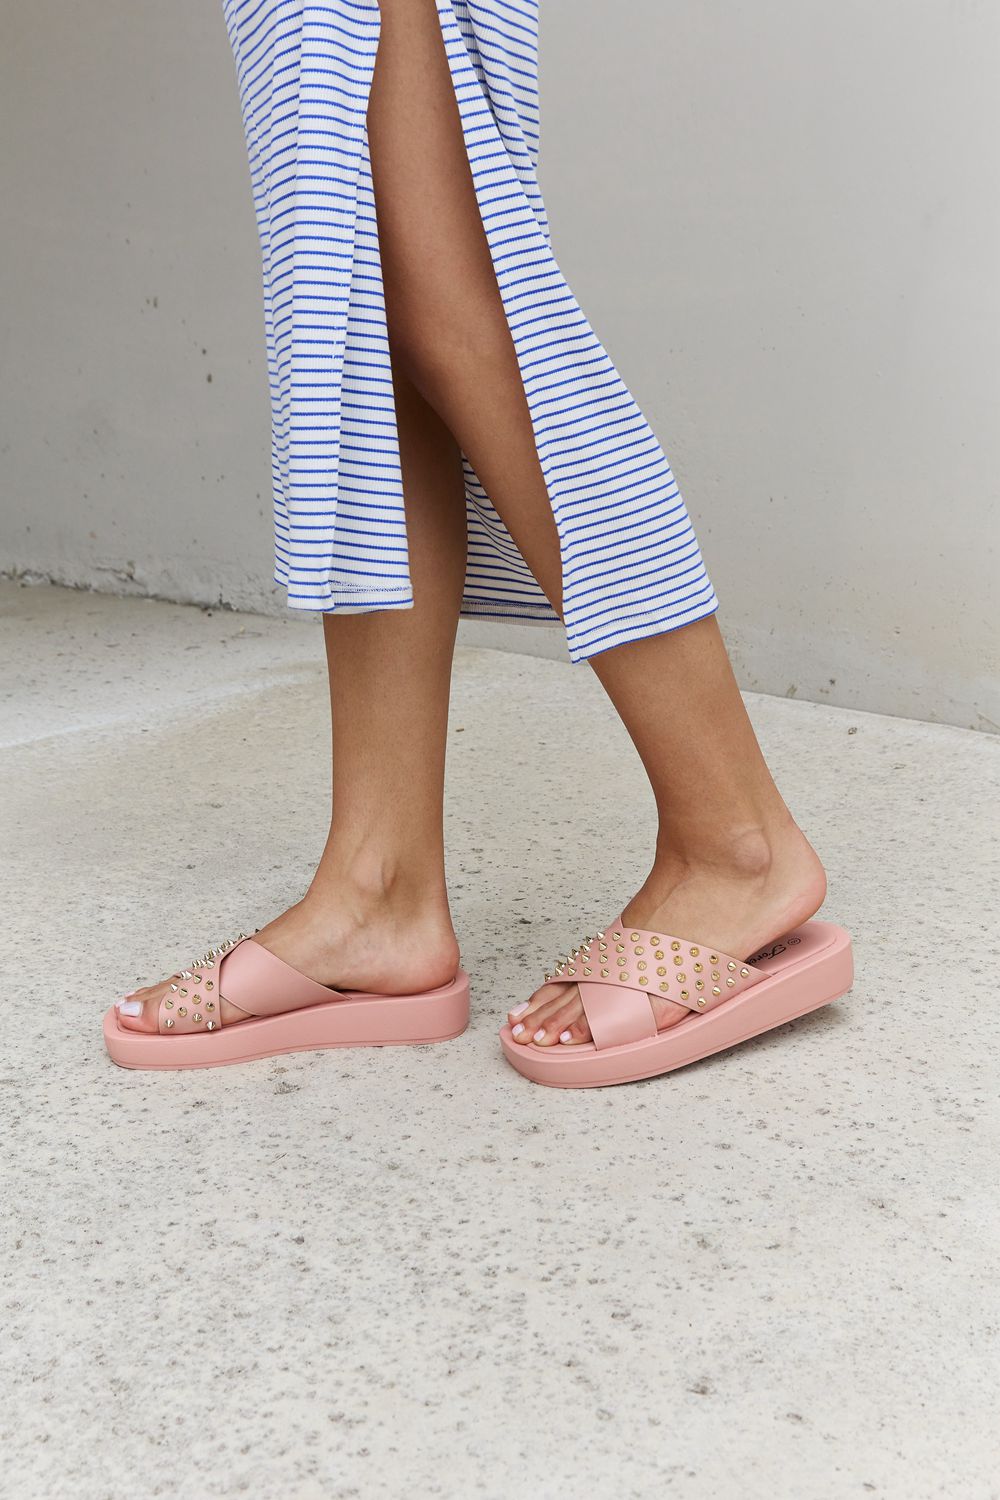 Forever Link Studded Cross Strap Sandals in Blush - Tigbul's Fashion